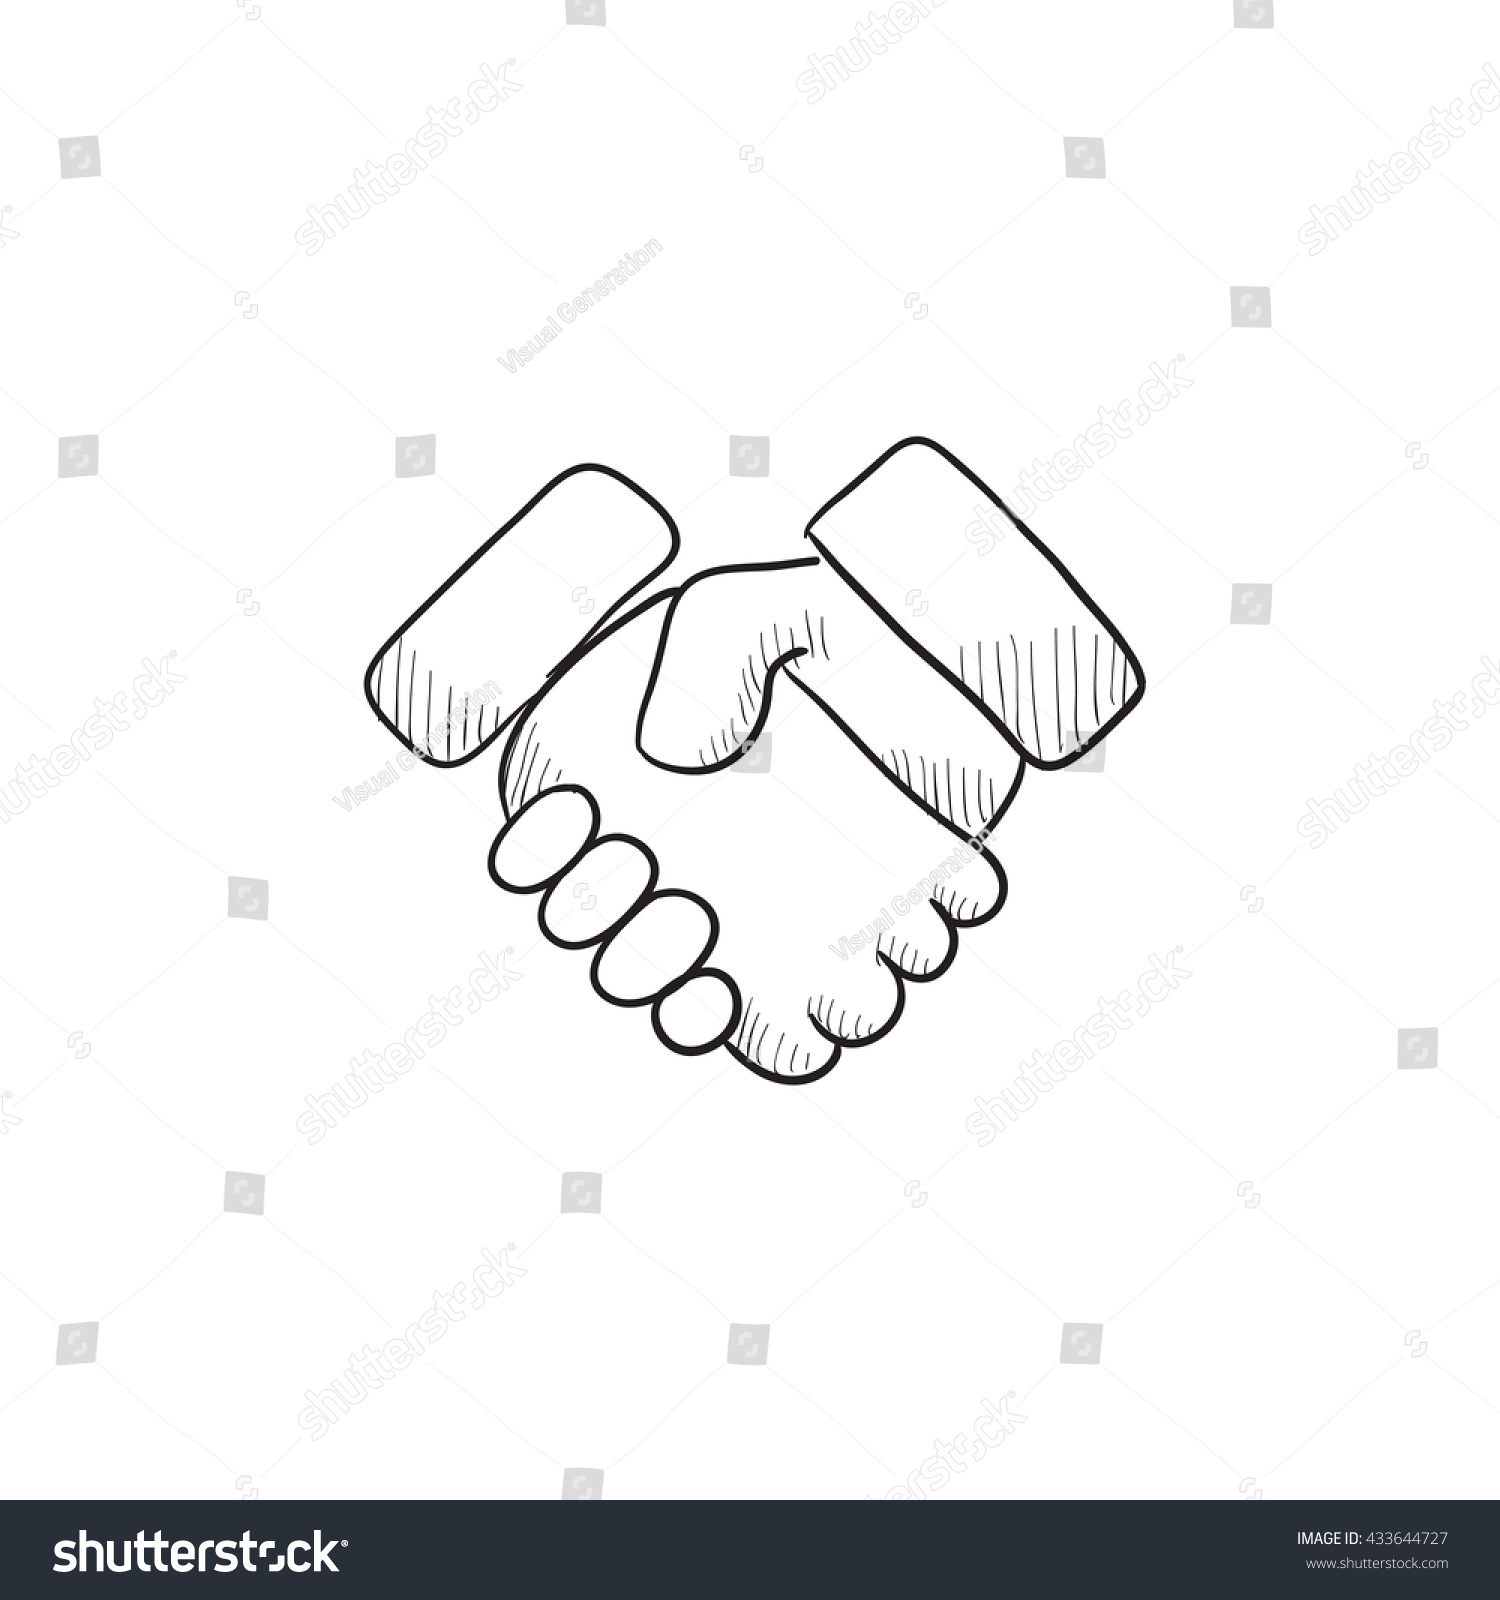 Handshake Vector Sketch Icon Isolated On Stock Vector (Royalty Free